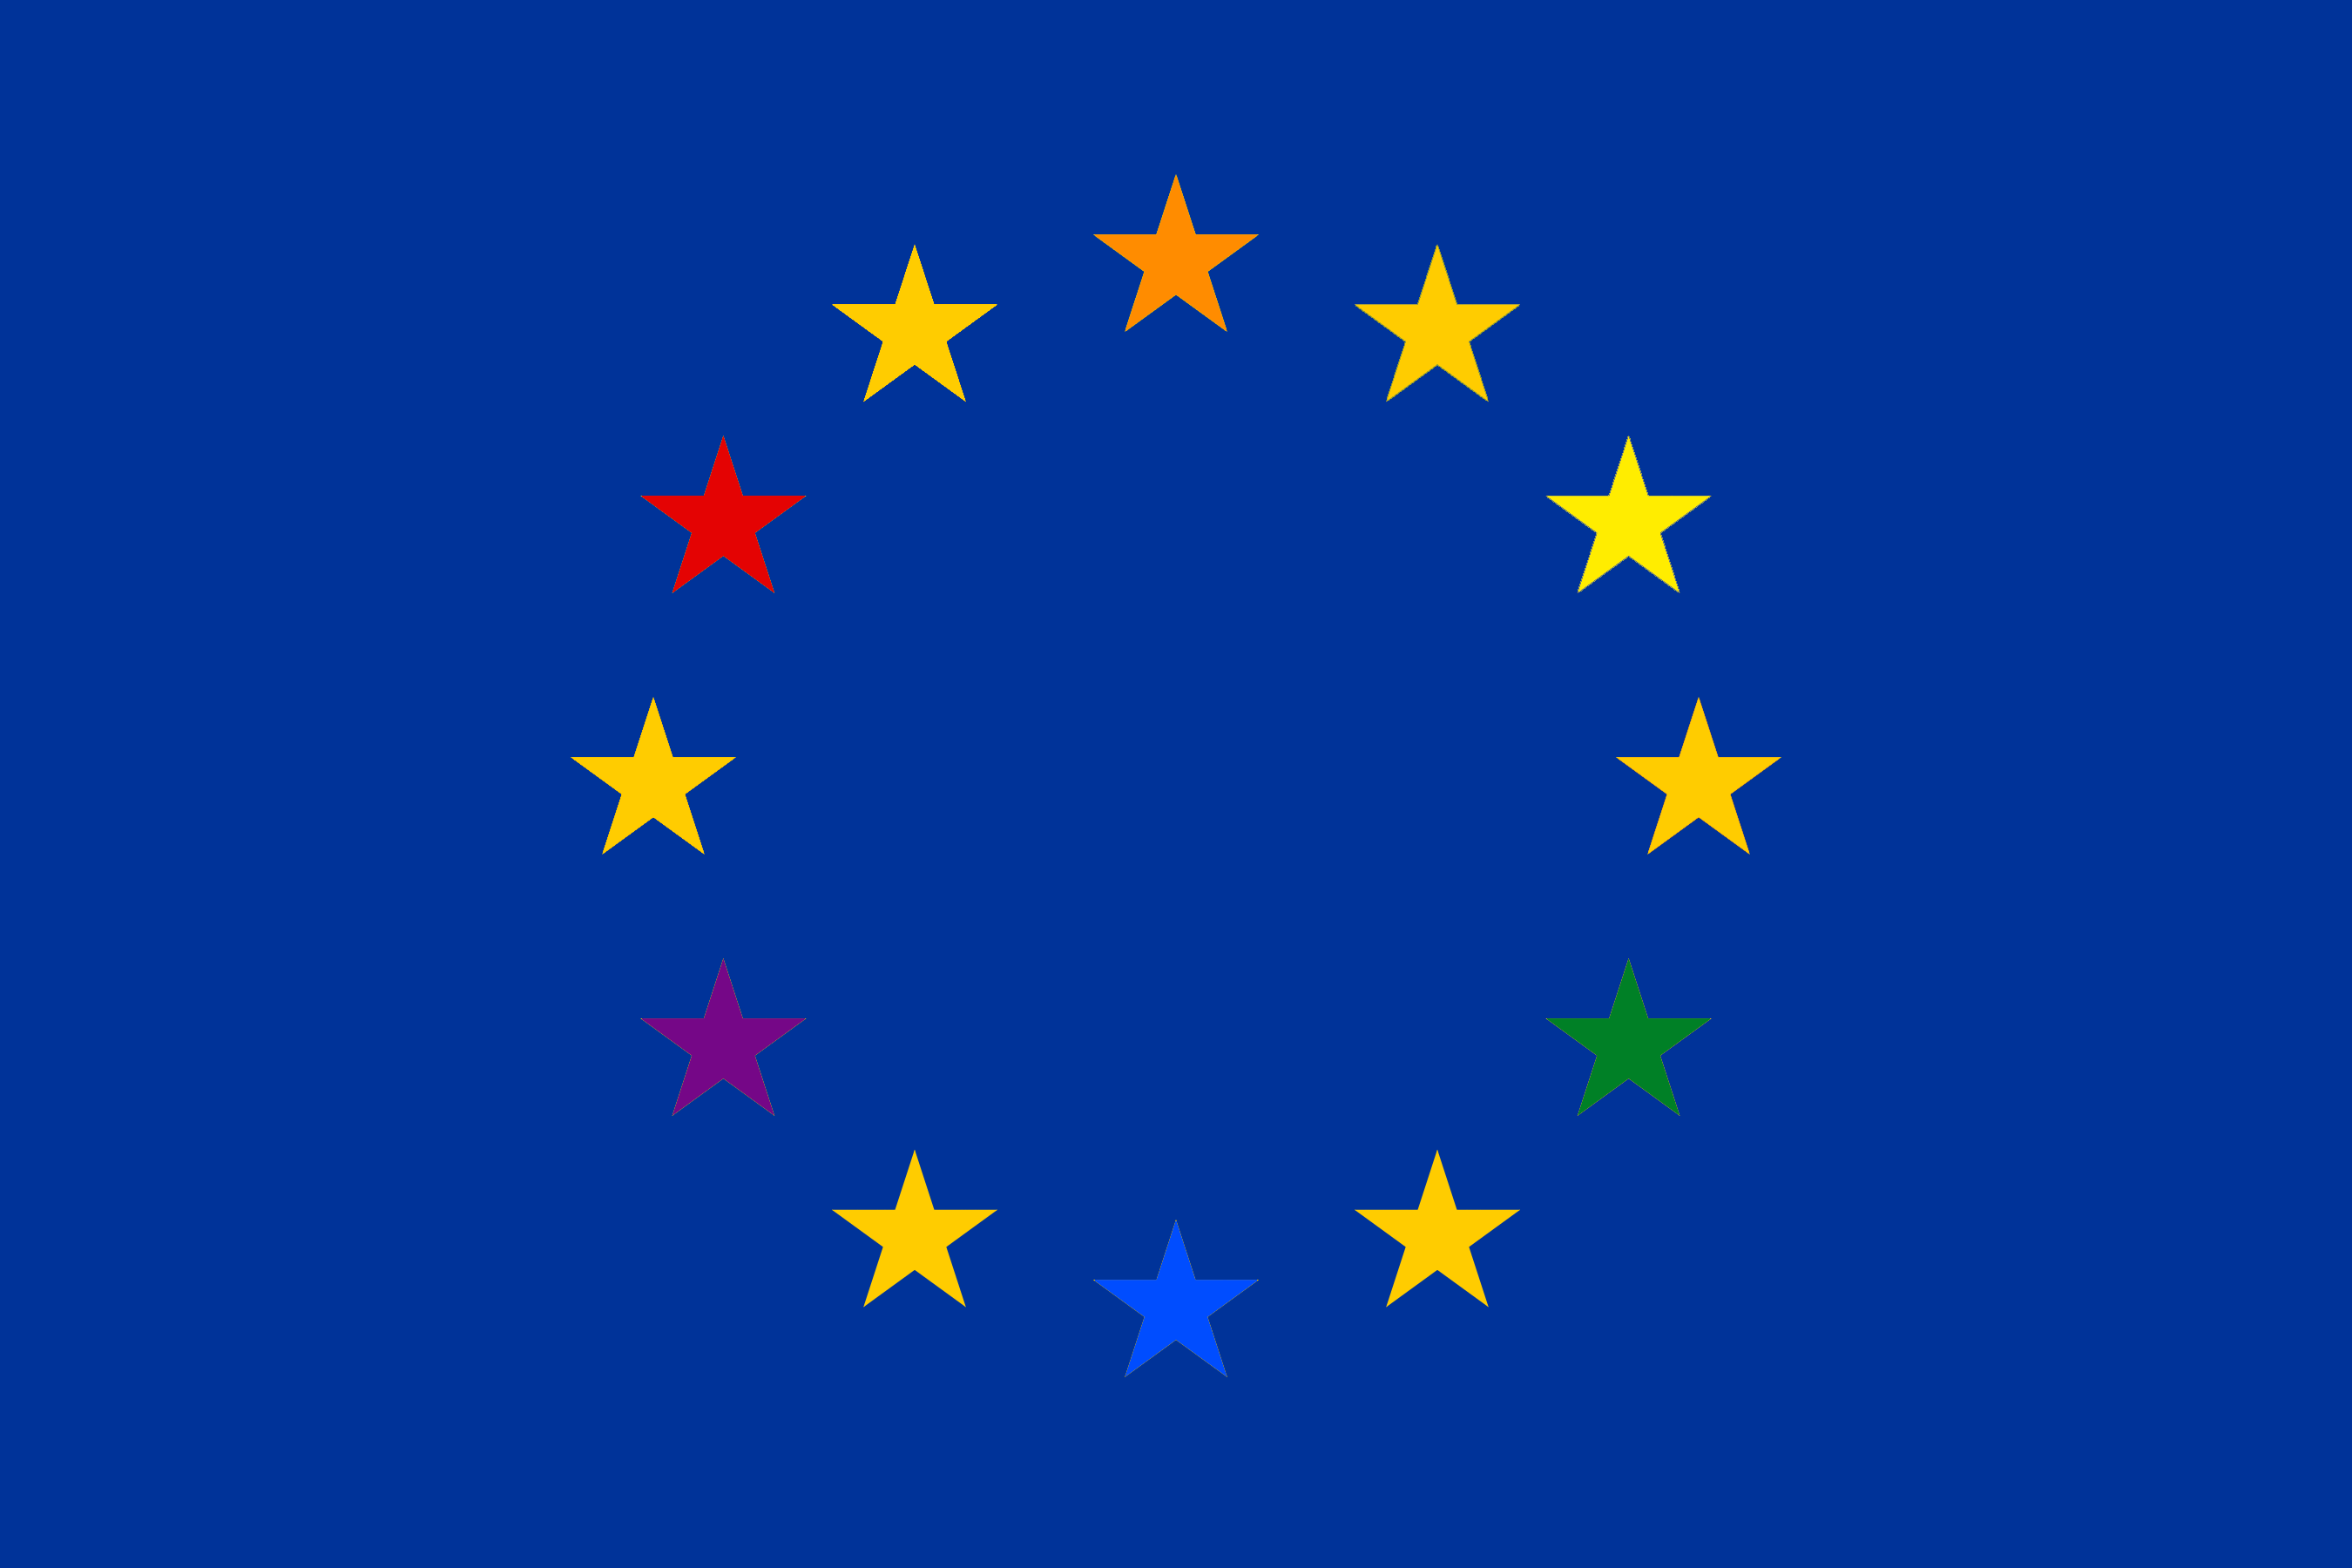 //nxf.ie/wp-content/uploads/2019/12/European_Gay_Flag_Round-1.png